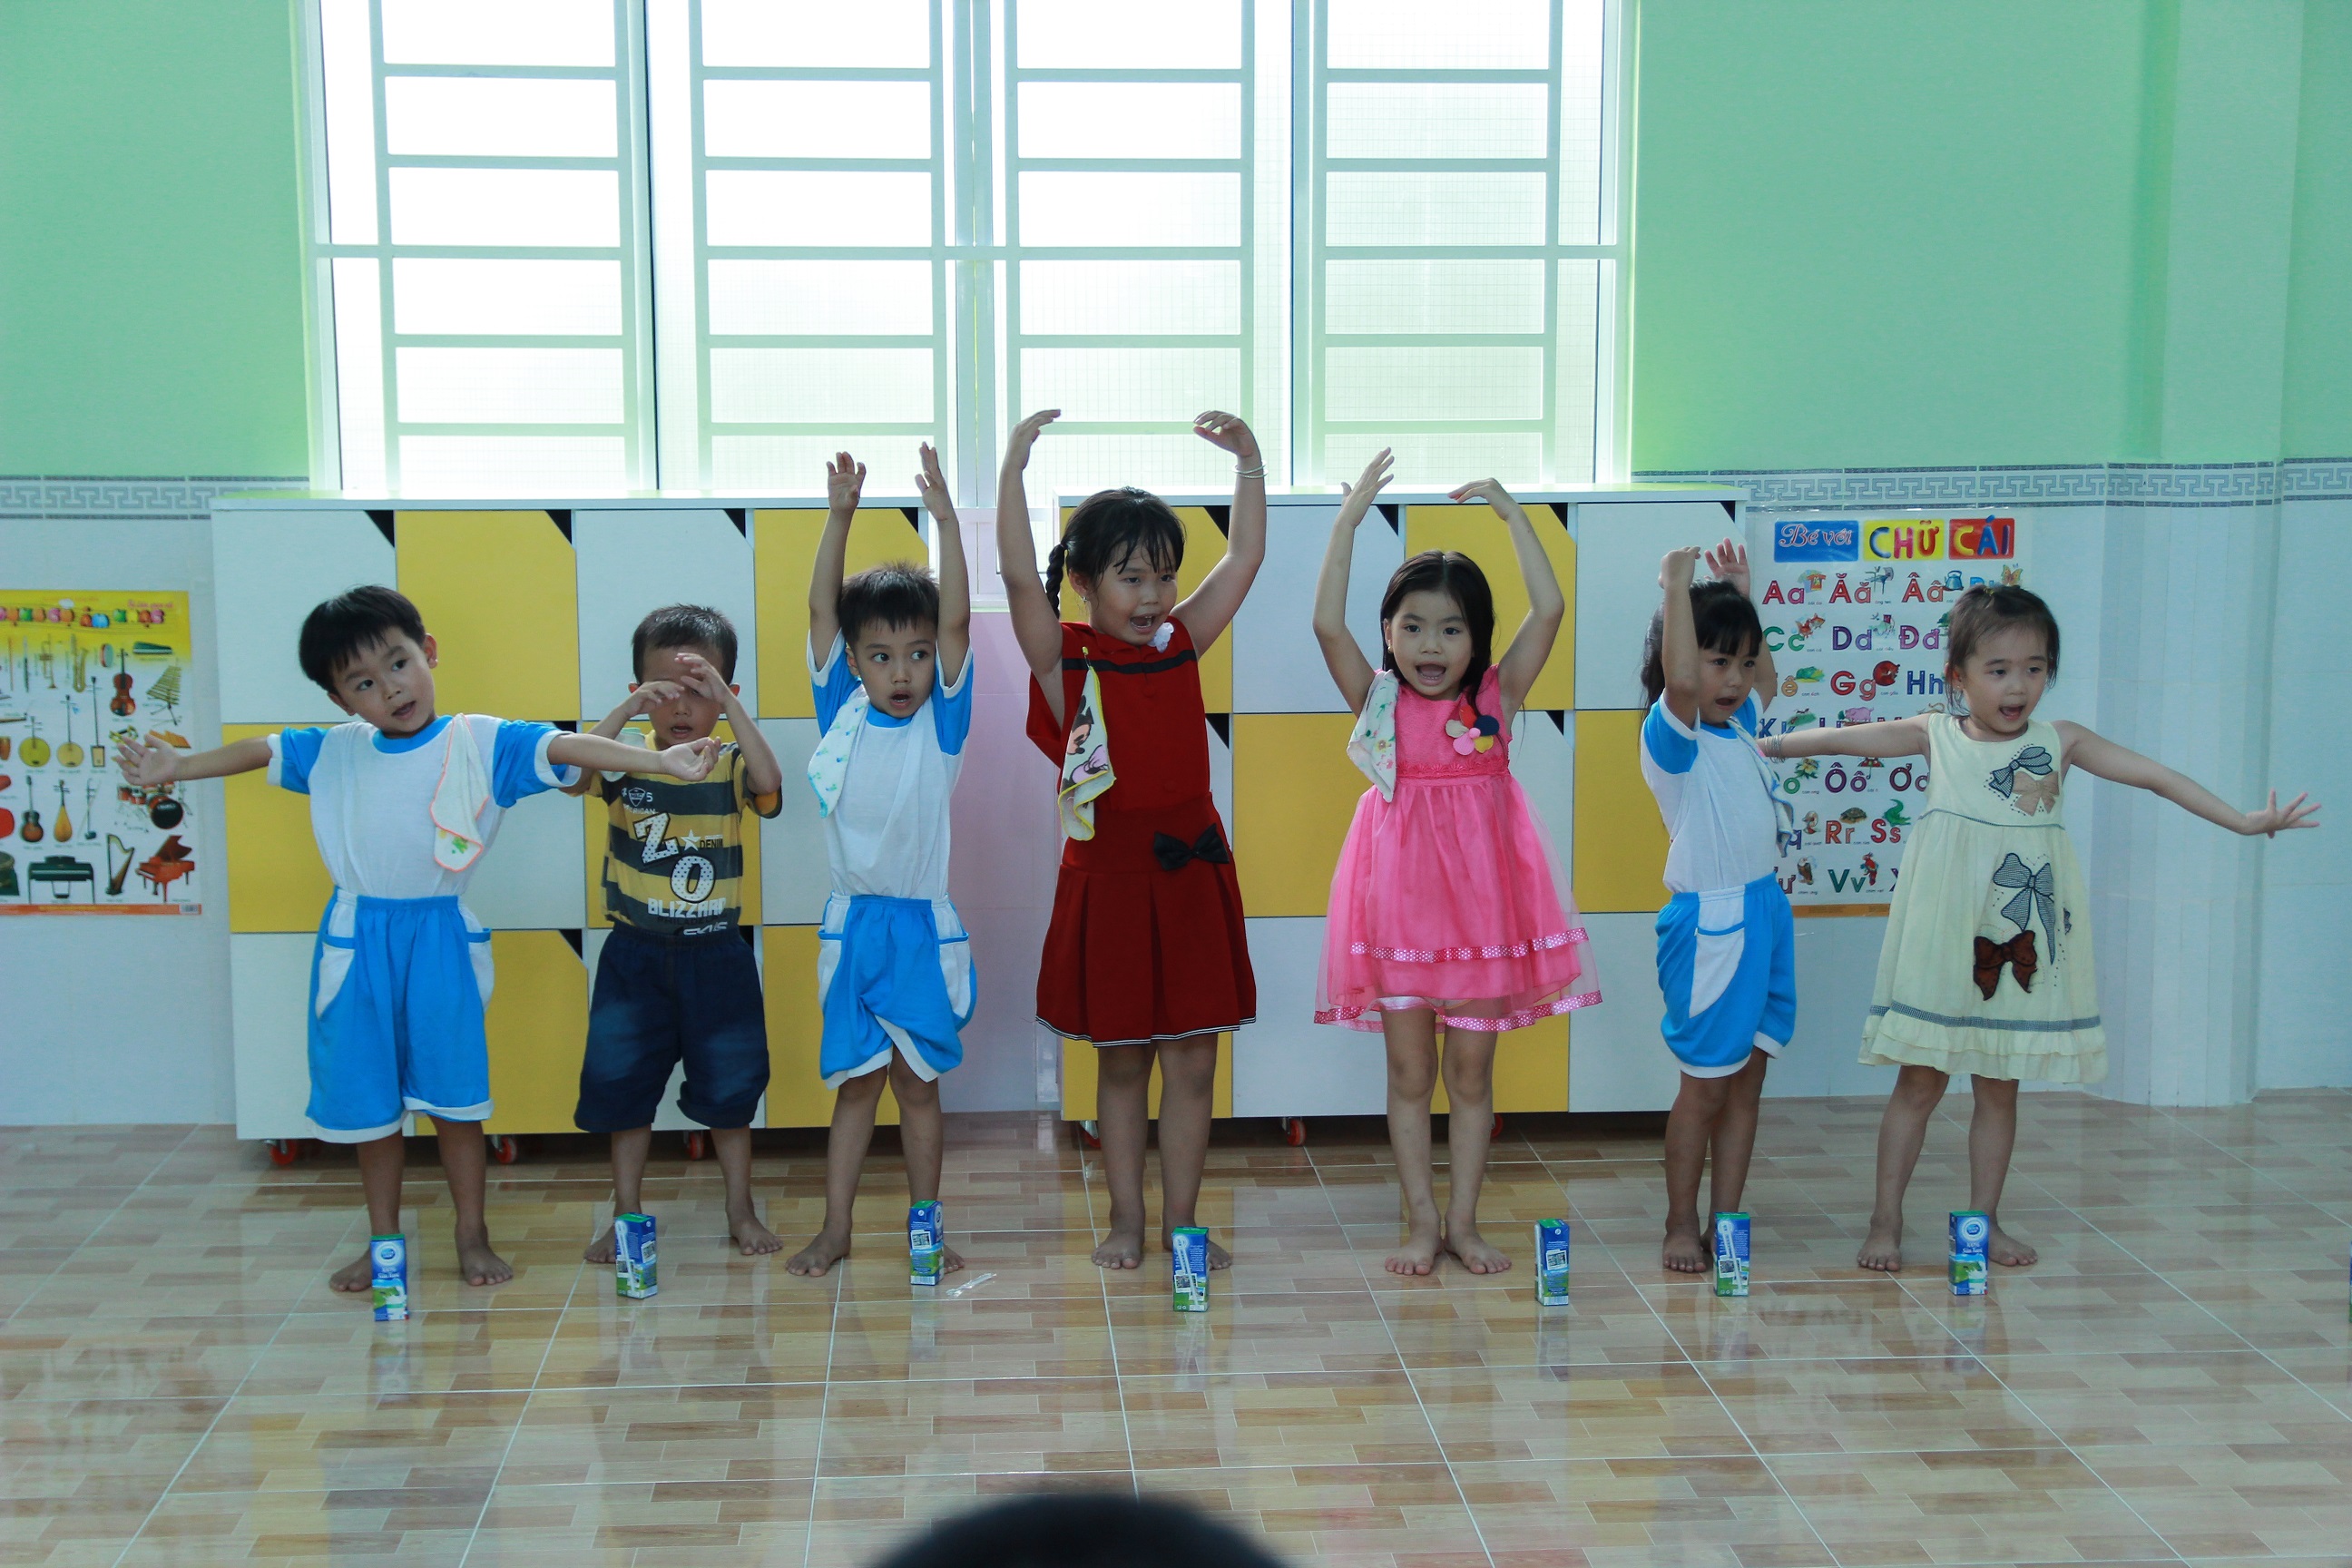 Funding and innovative solutions from BASF help improve two needy schools in Hau Giang